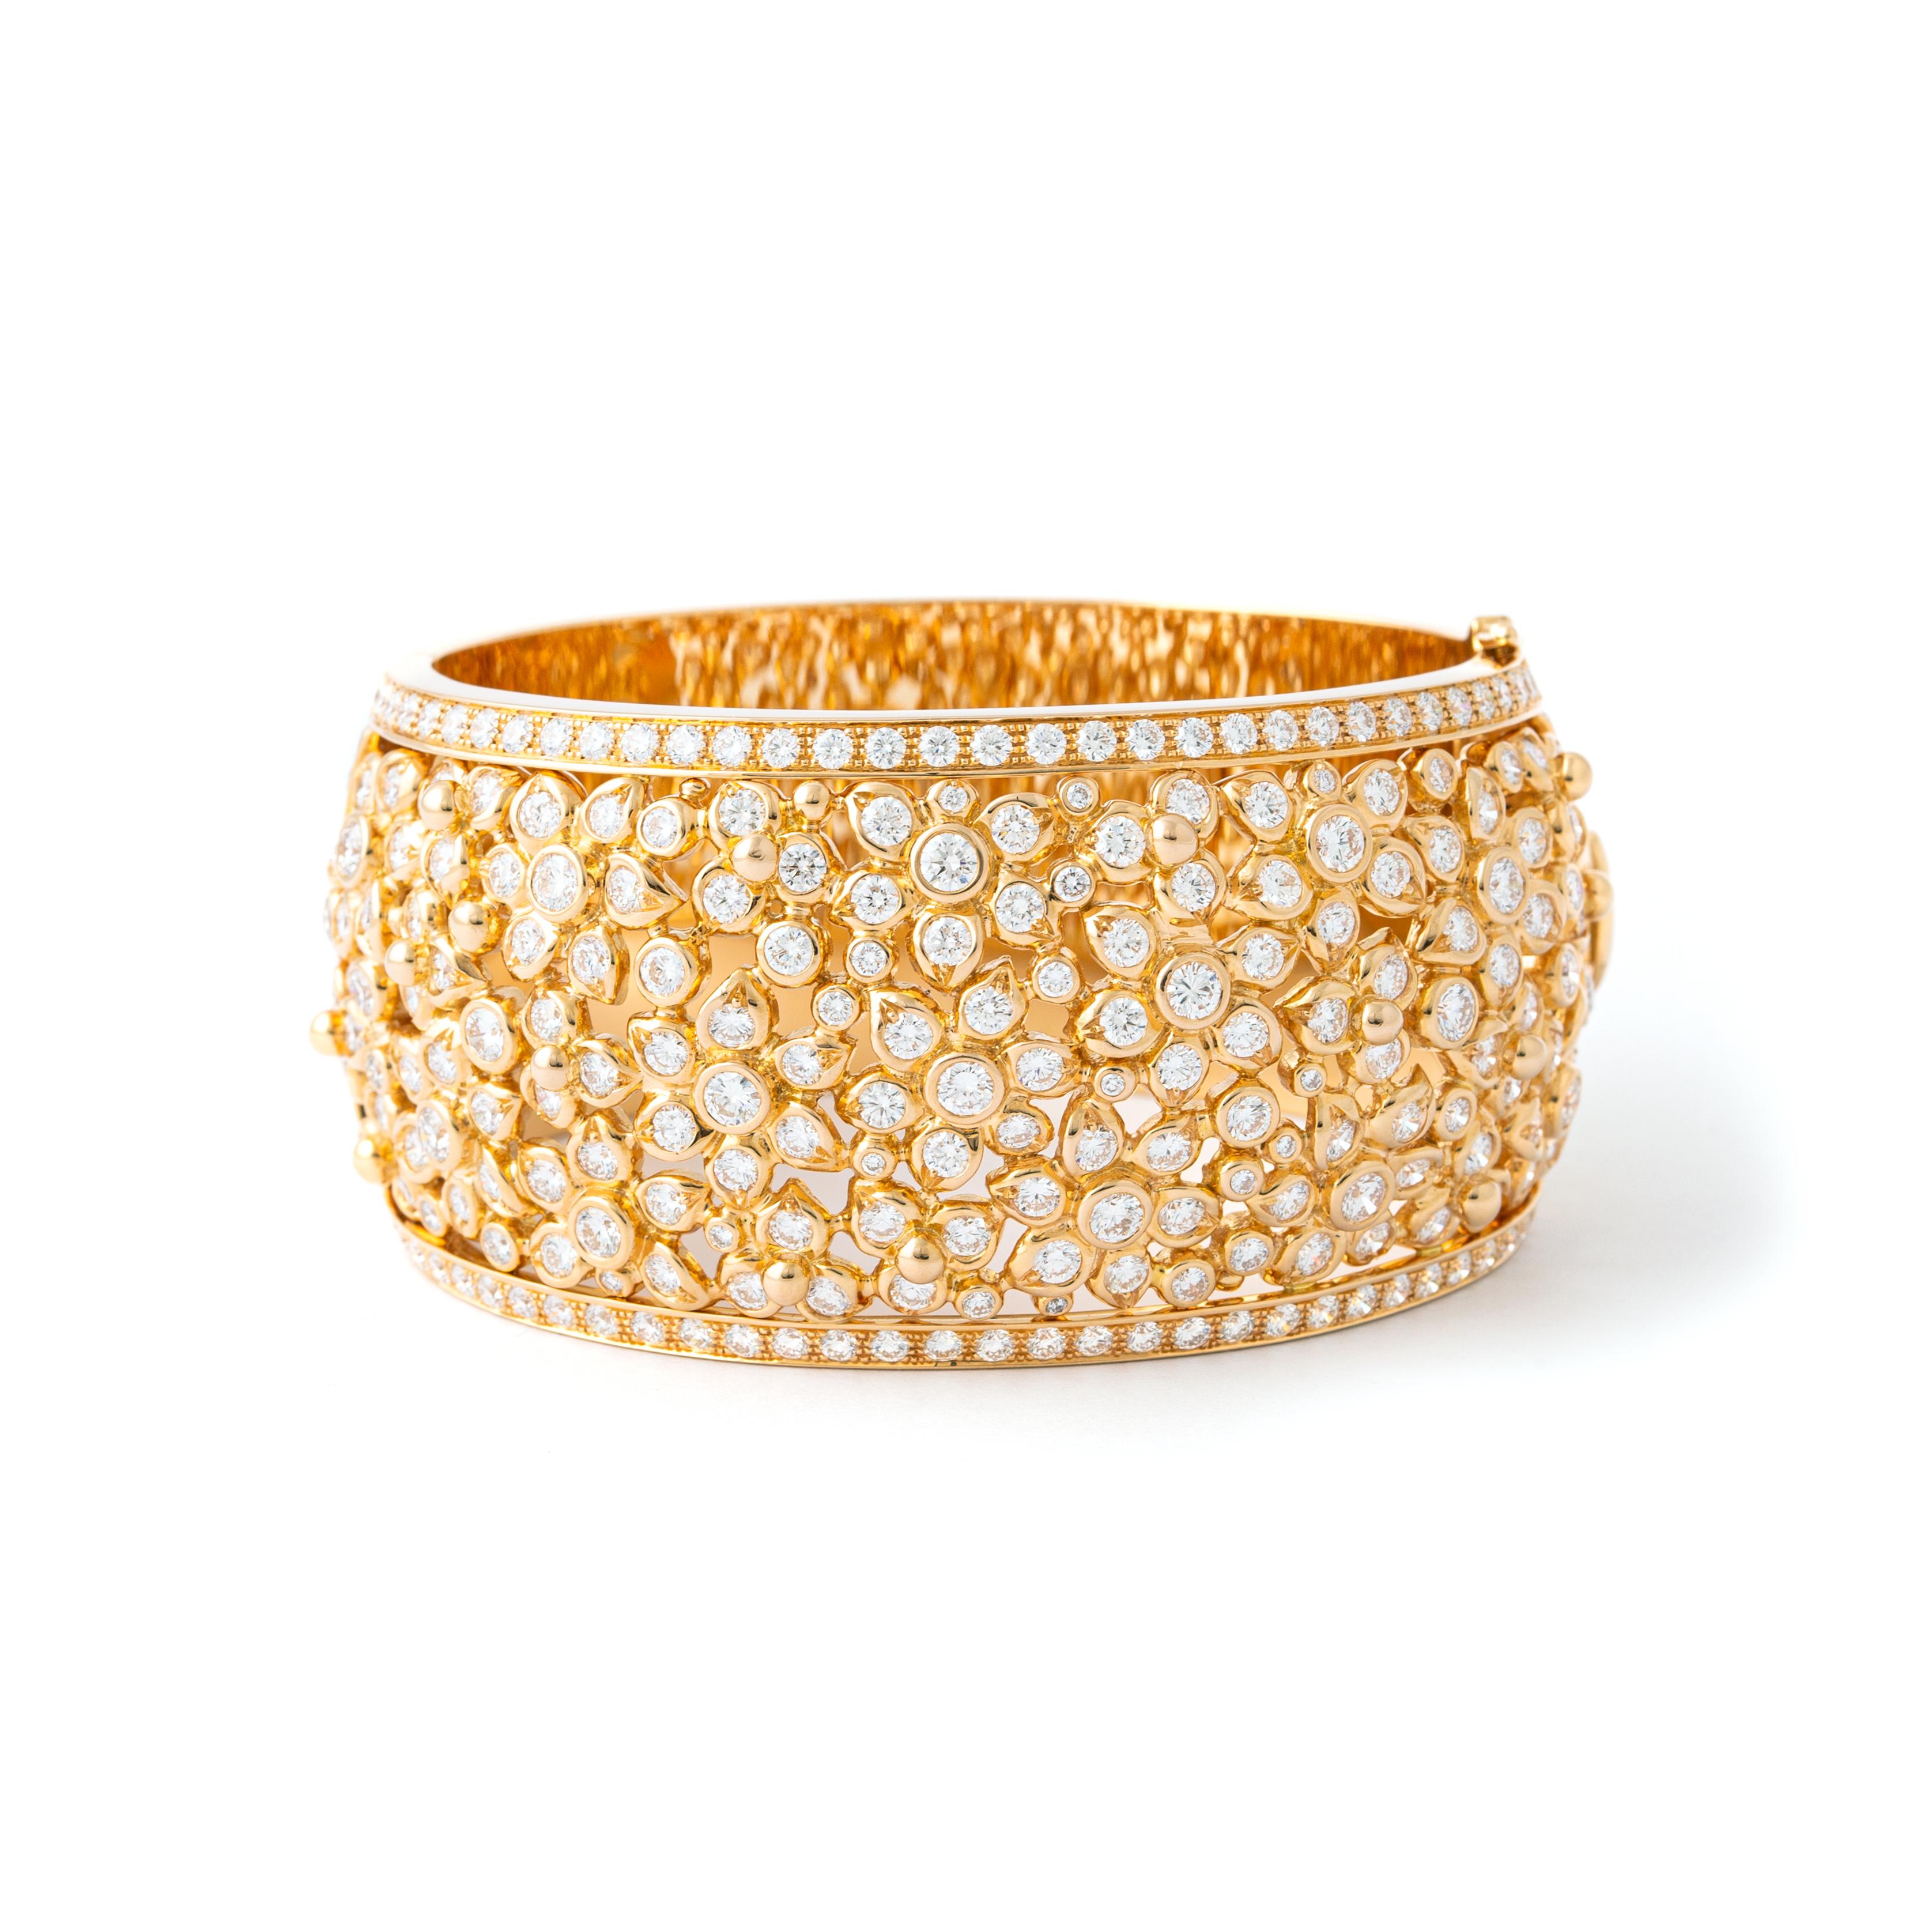 Flowers Bangle in 18kt pink gold set with 260 diamonds 13.41 cts.

Inner circumference: Approximately 16.01 centimeters (6.30 inches).

Total weight: 127.18 grams.

Width: 3.5 centimeters (0.51 inches)